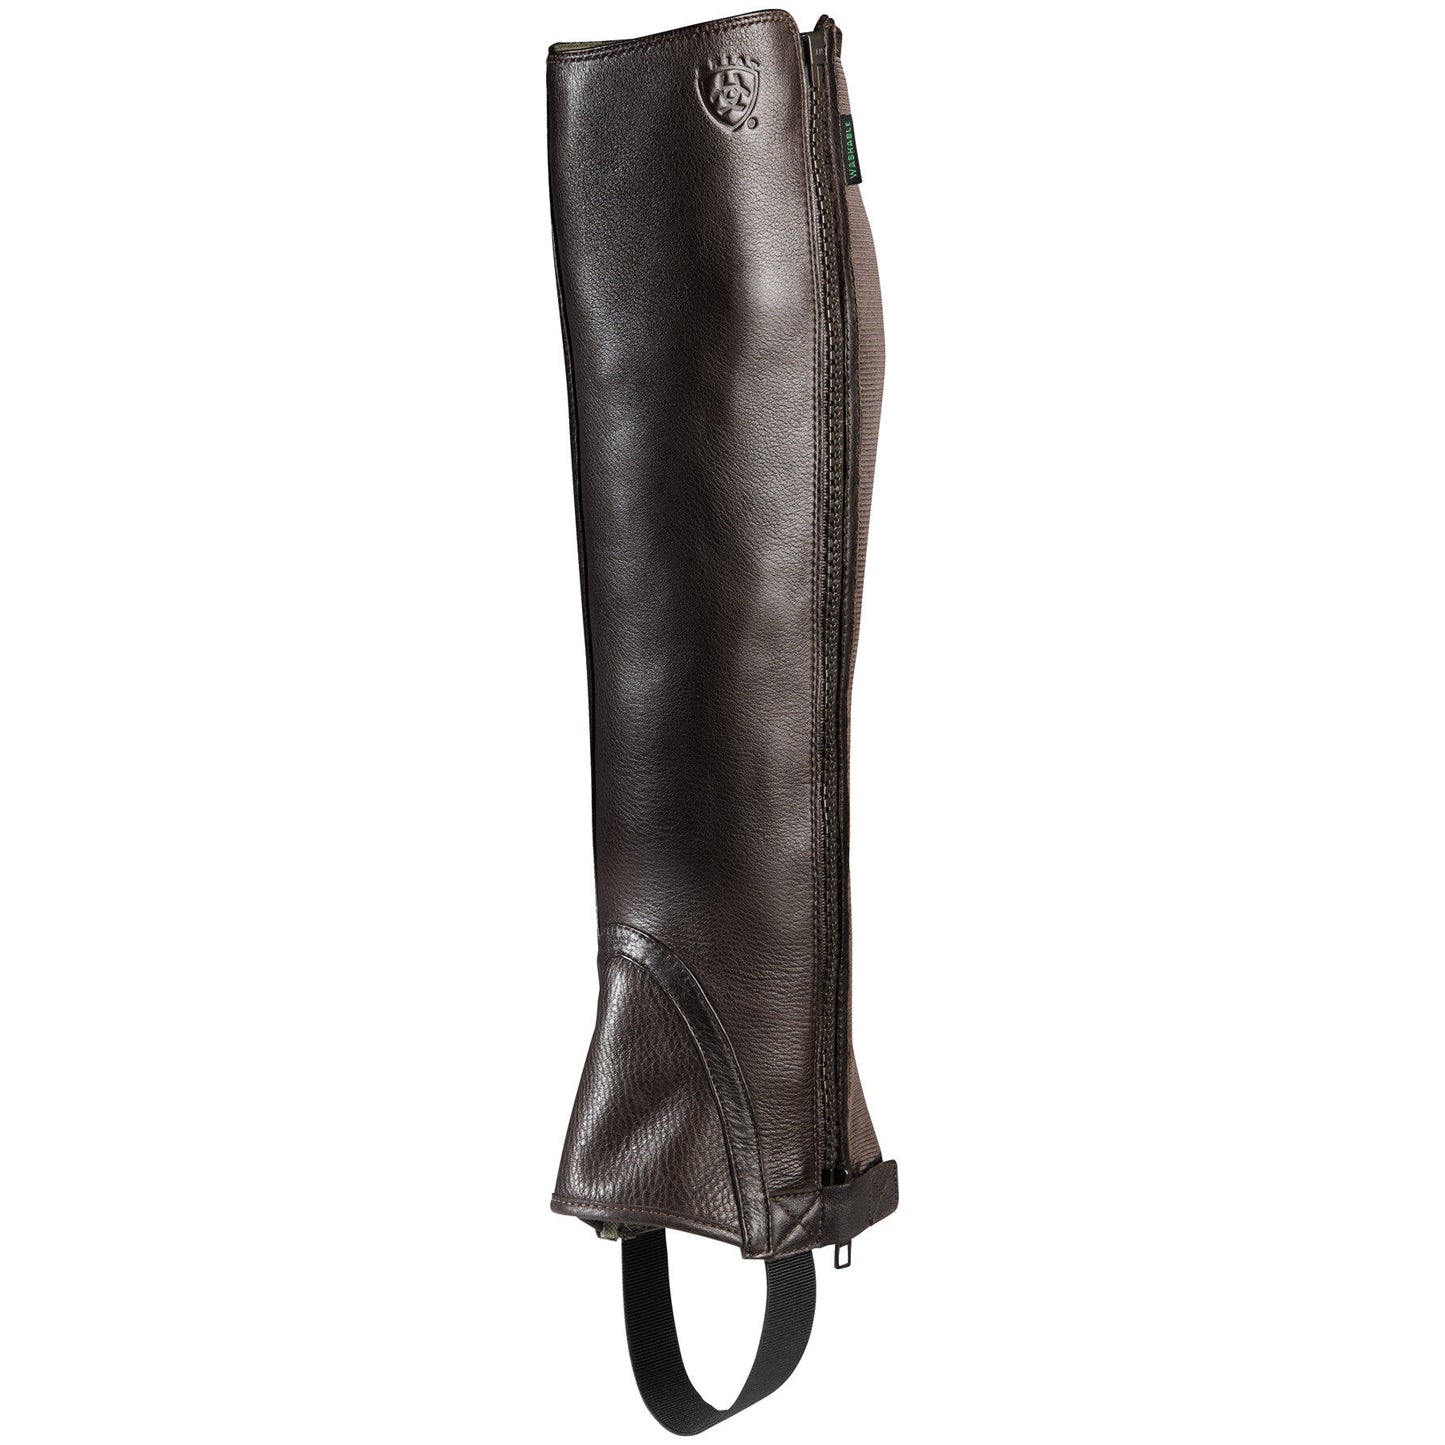 Ariat Breeze Chap - Chocolate - French's Boots